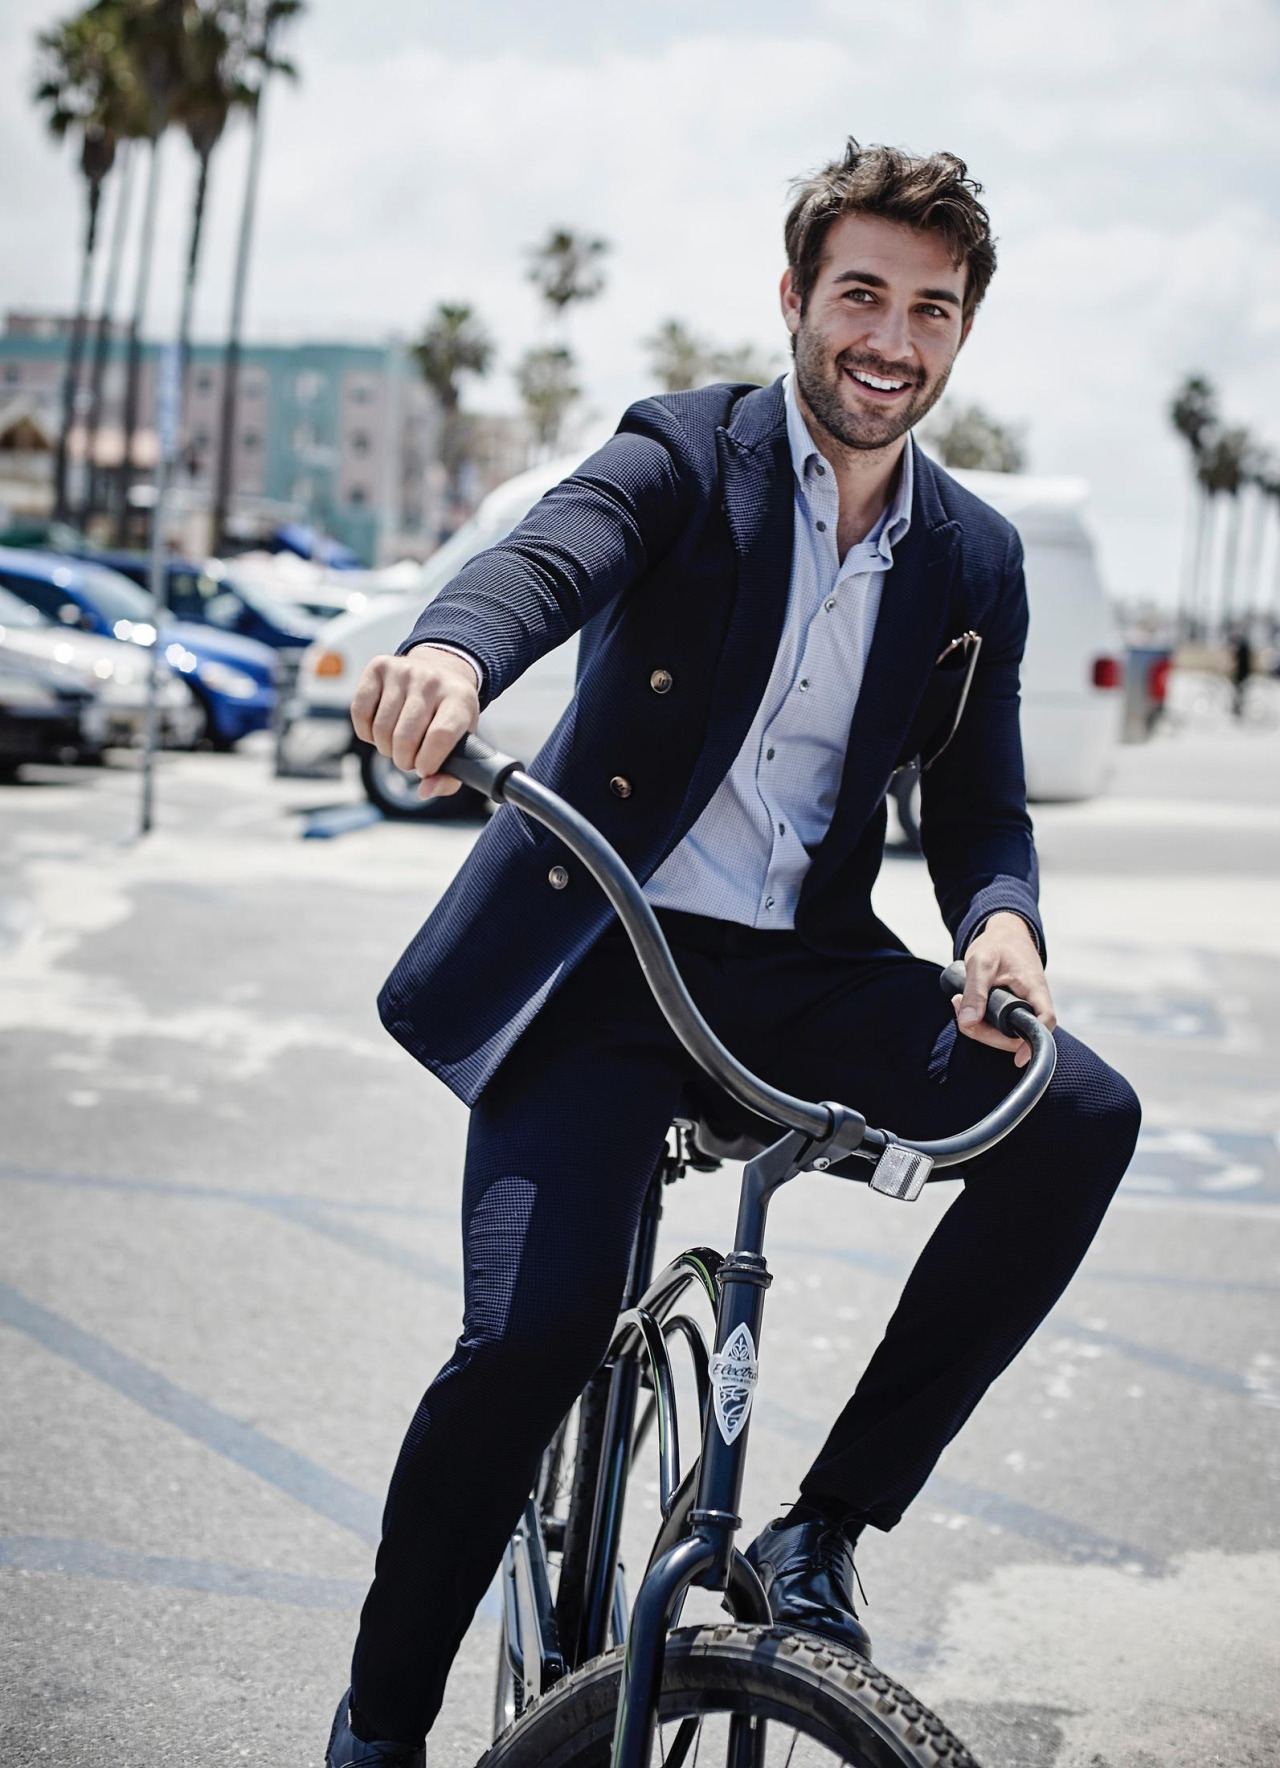 Zoo Actor James Wolk Sports Summer Styles for Esquire Shoot